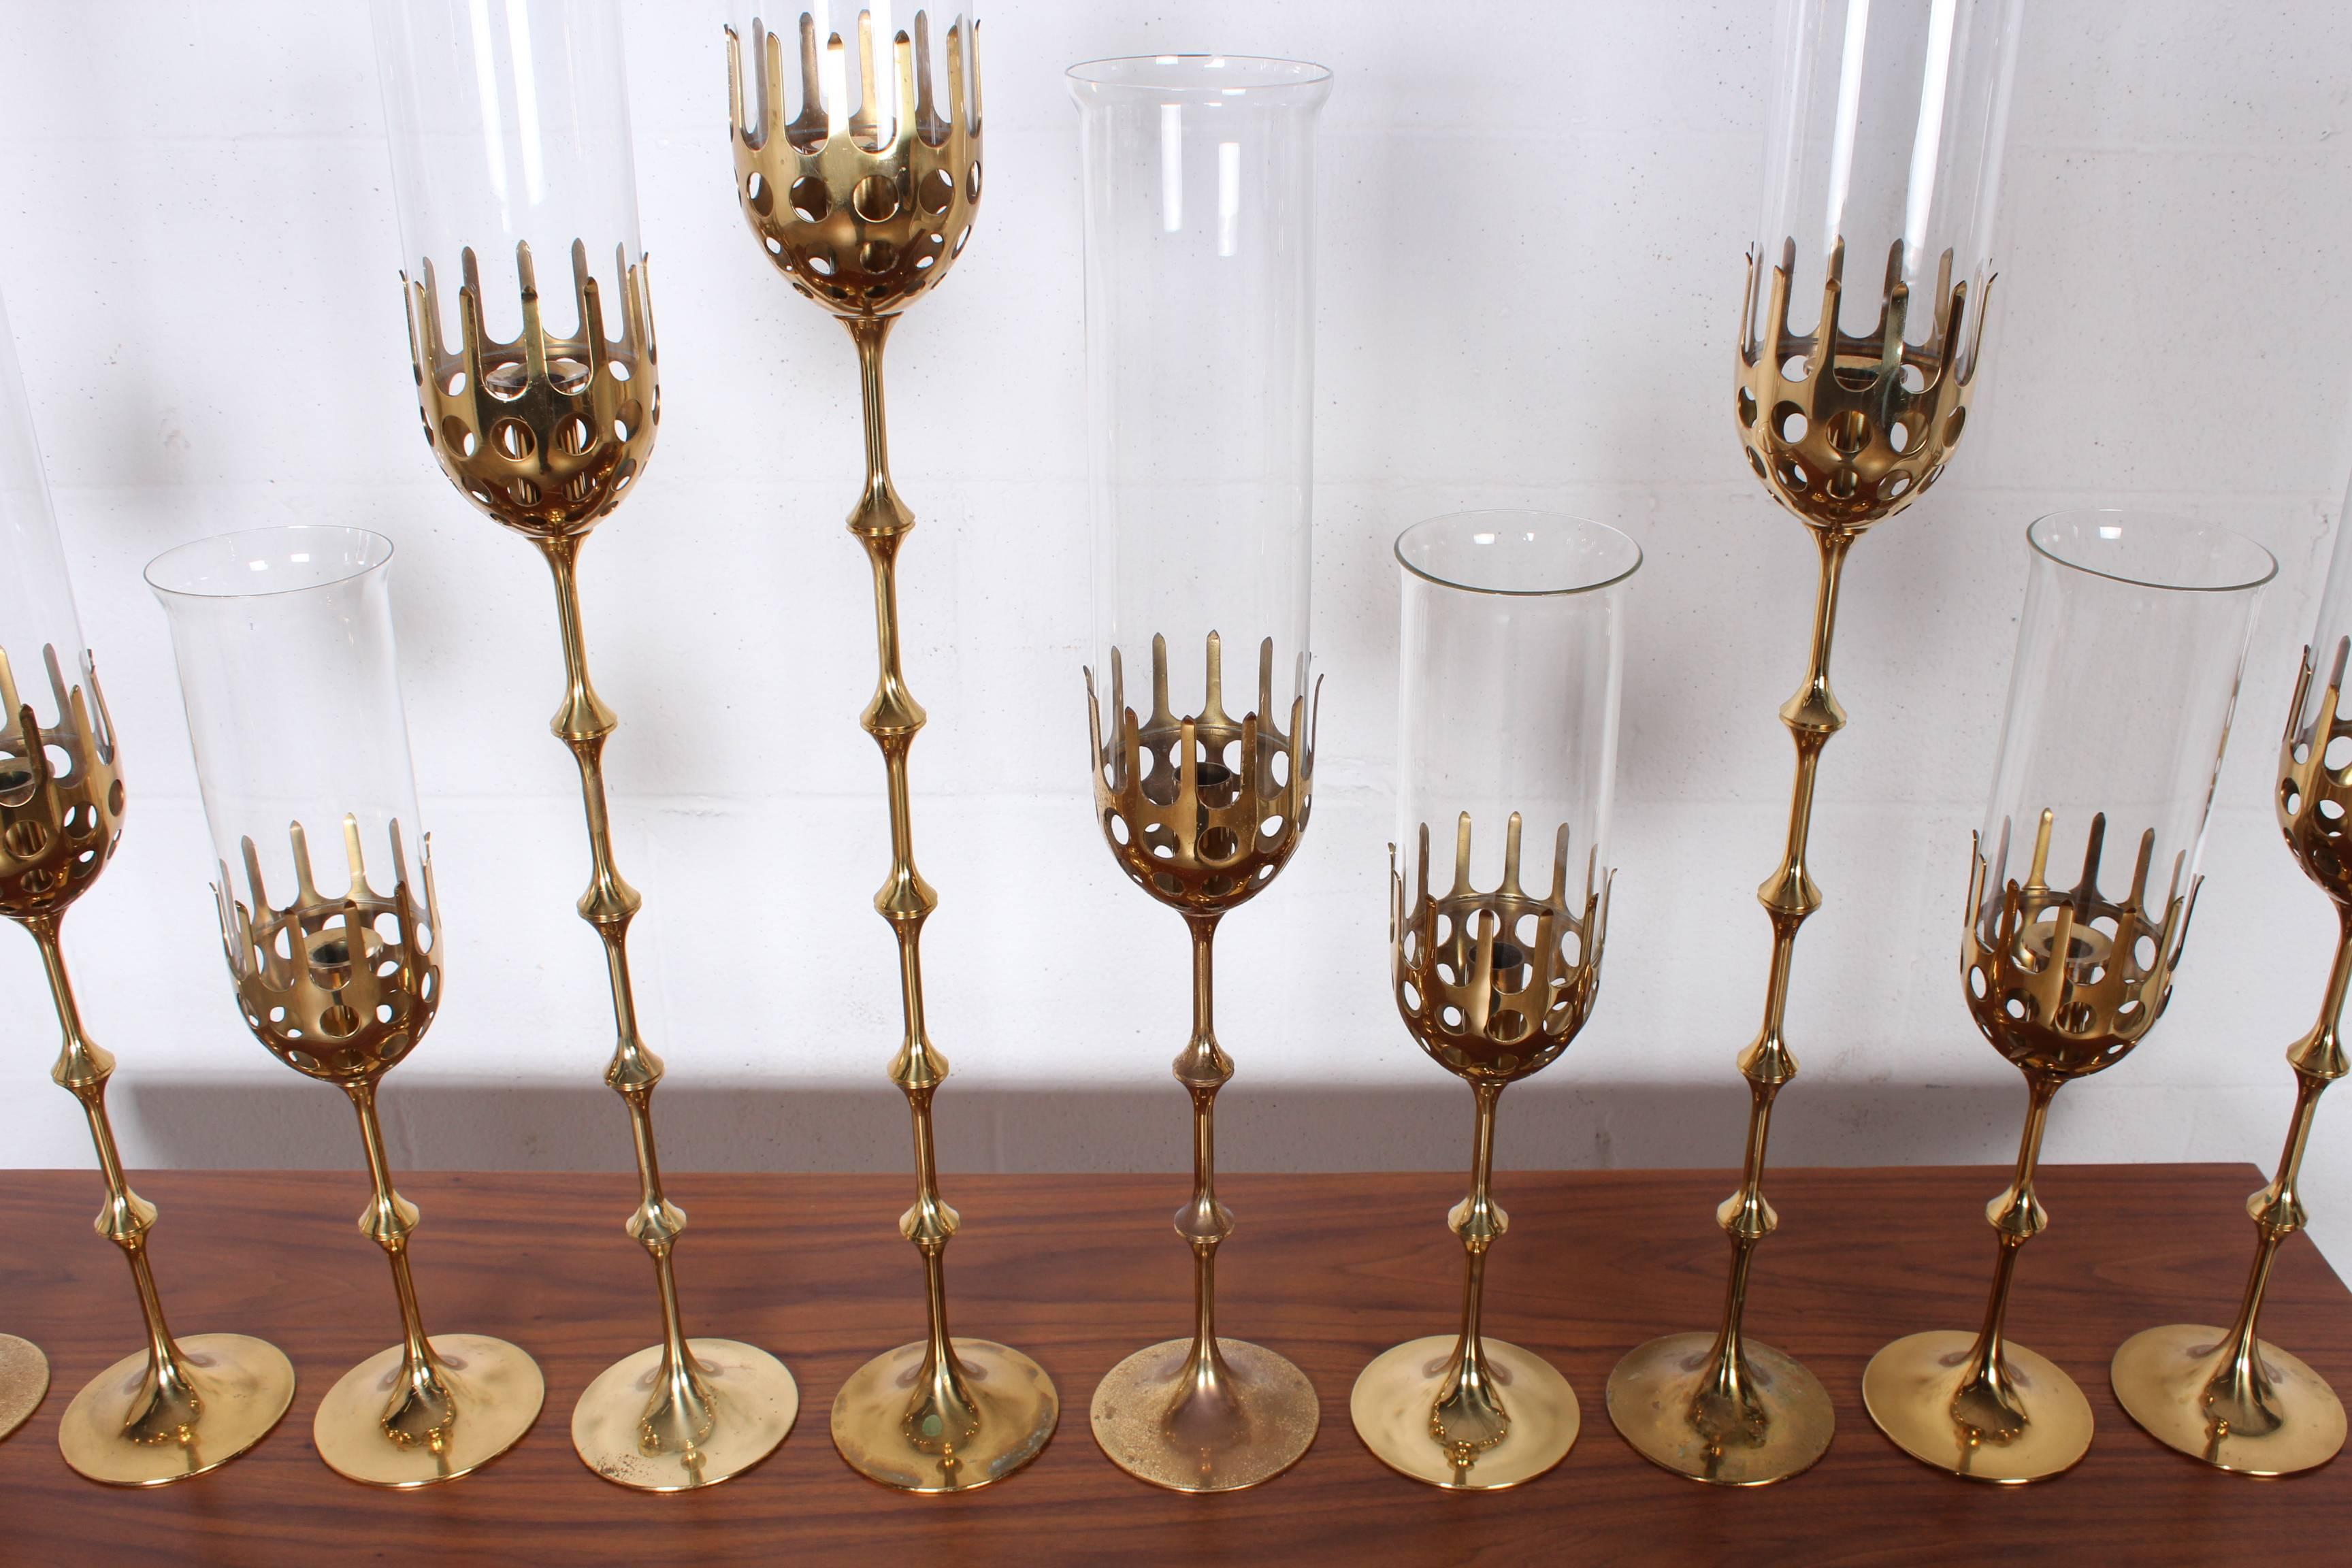 A large and impressive collection of brass candlesticks with glass hurricanes. Designed by Bjorn Winkled, each with maker impression to bottom.